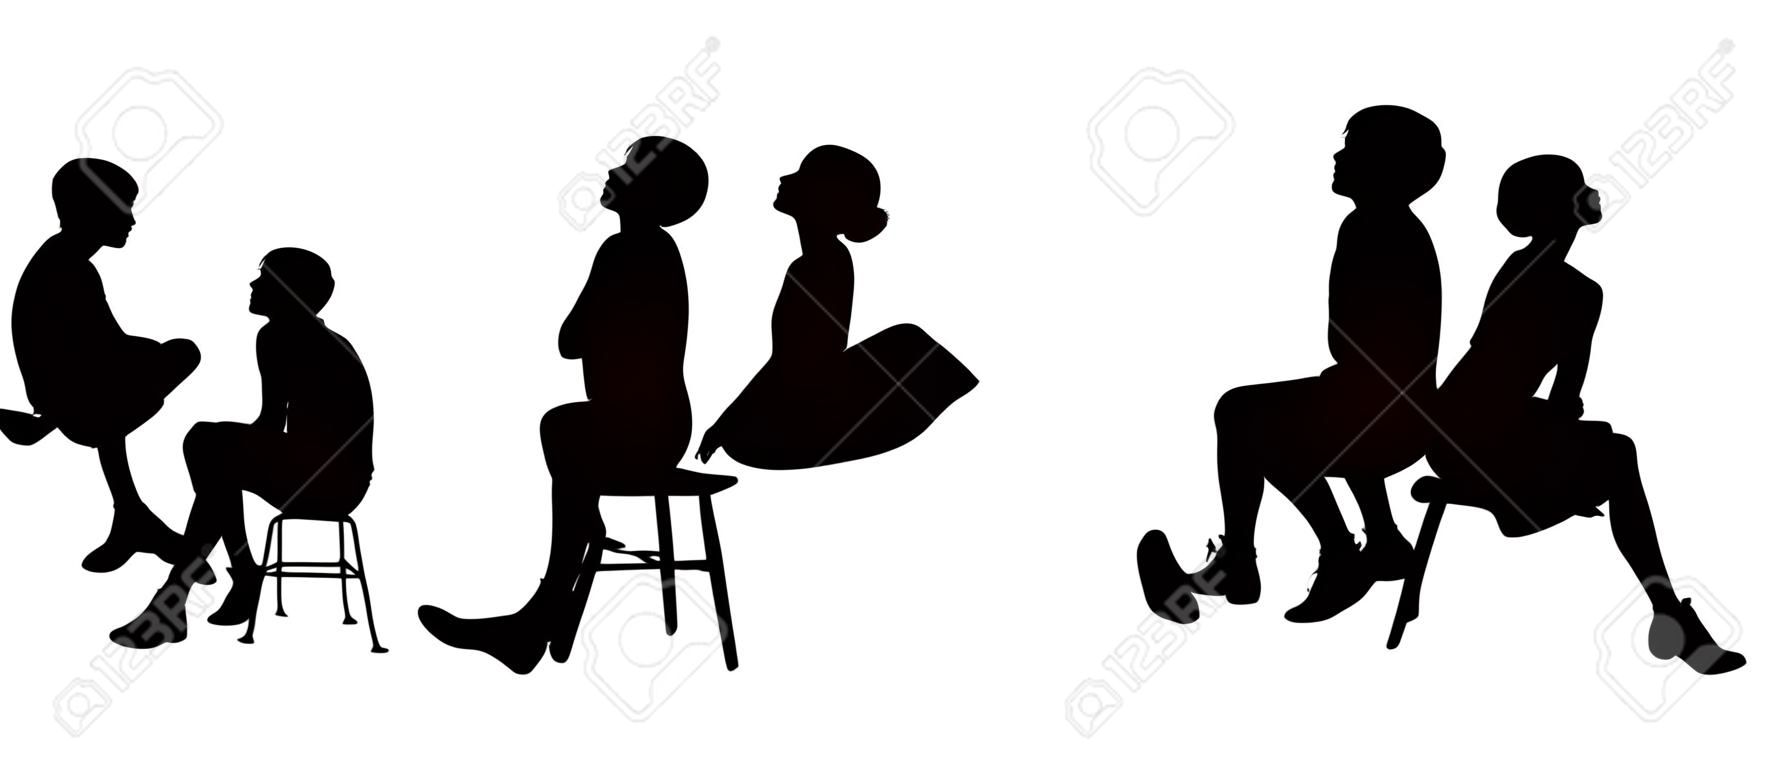 black silhouettes of young men and women seated outdoor in different postures, front, back and profile views